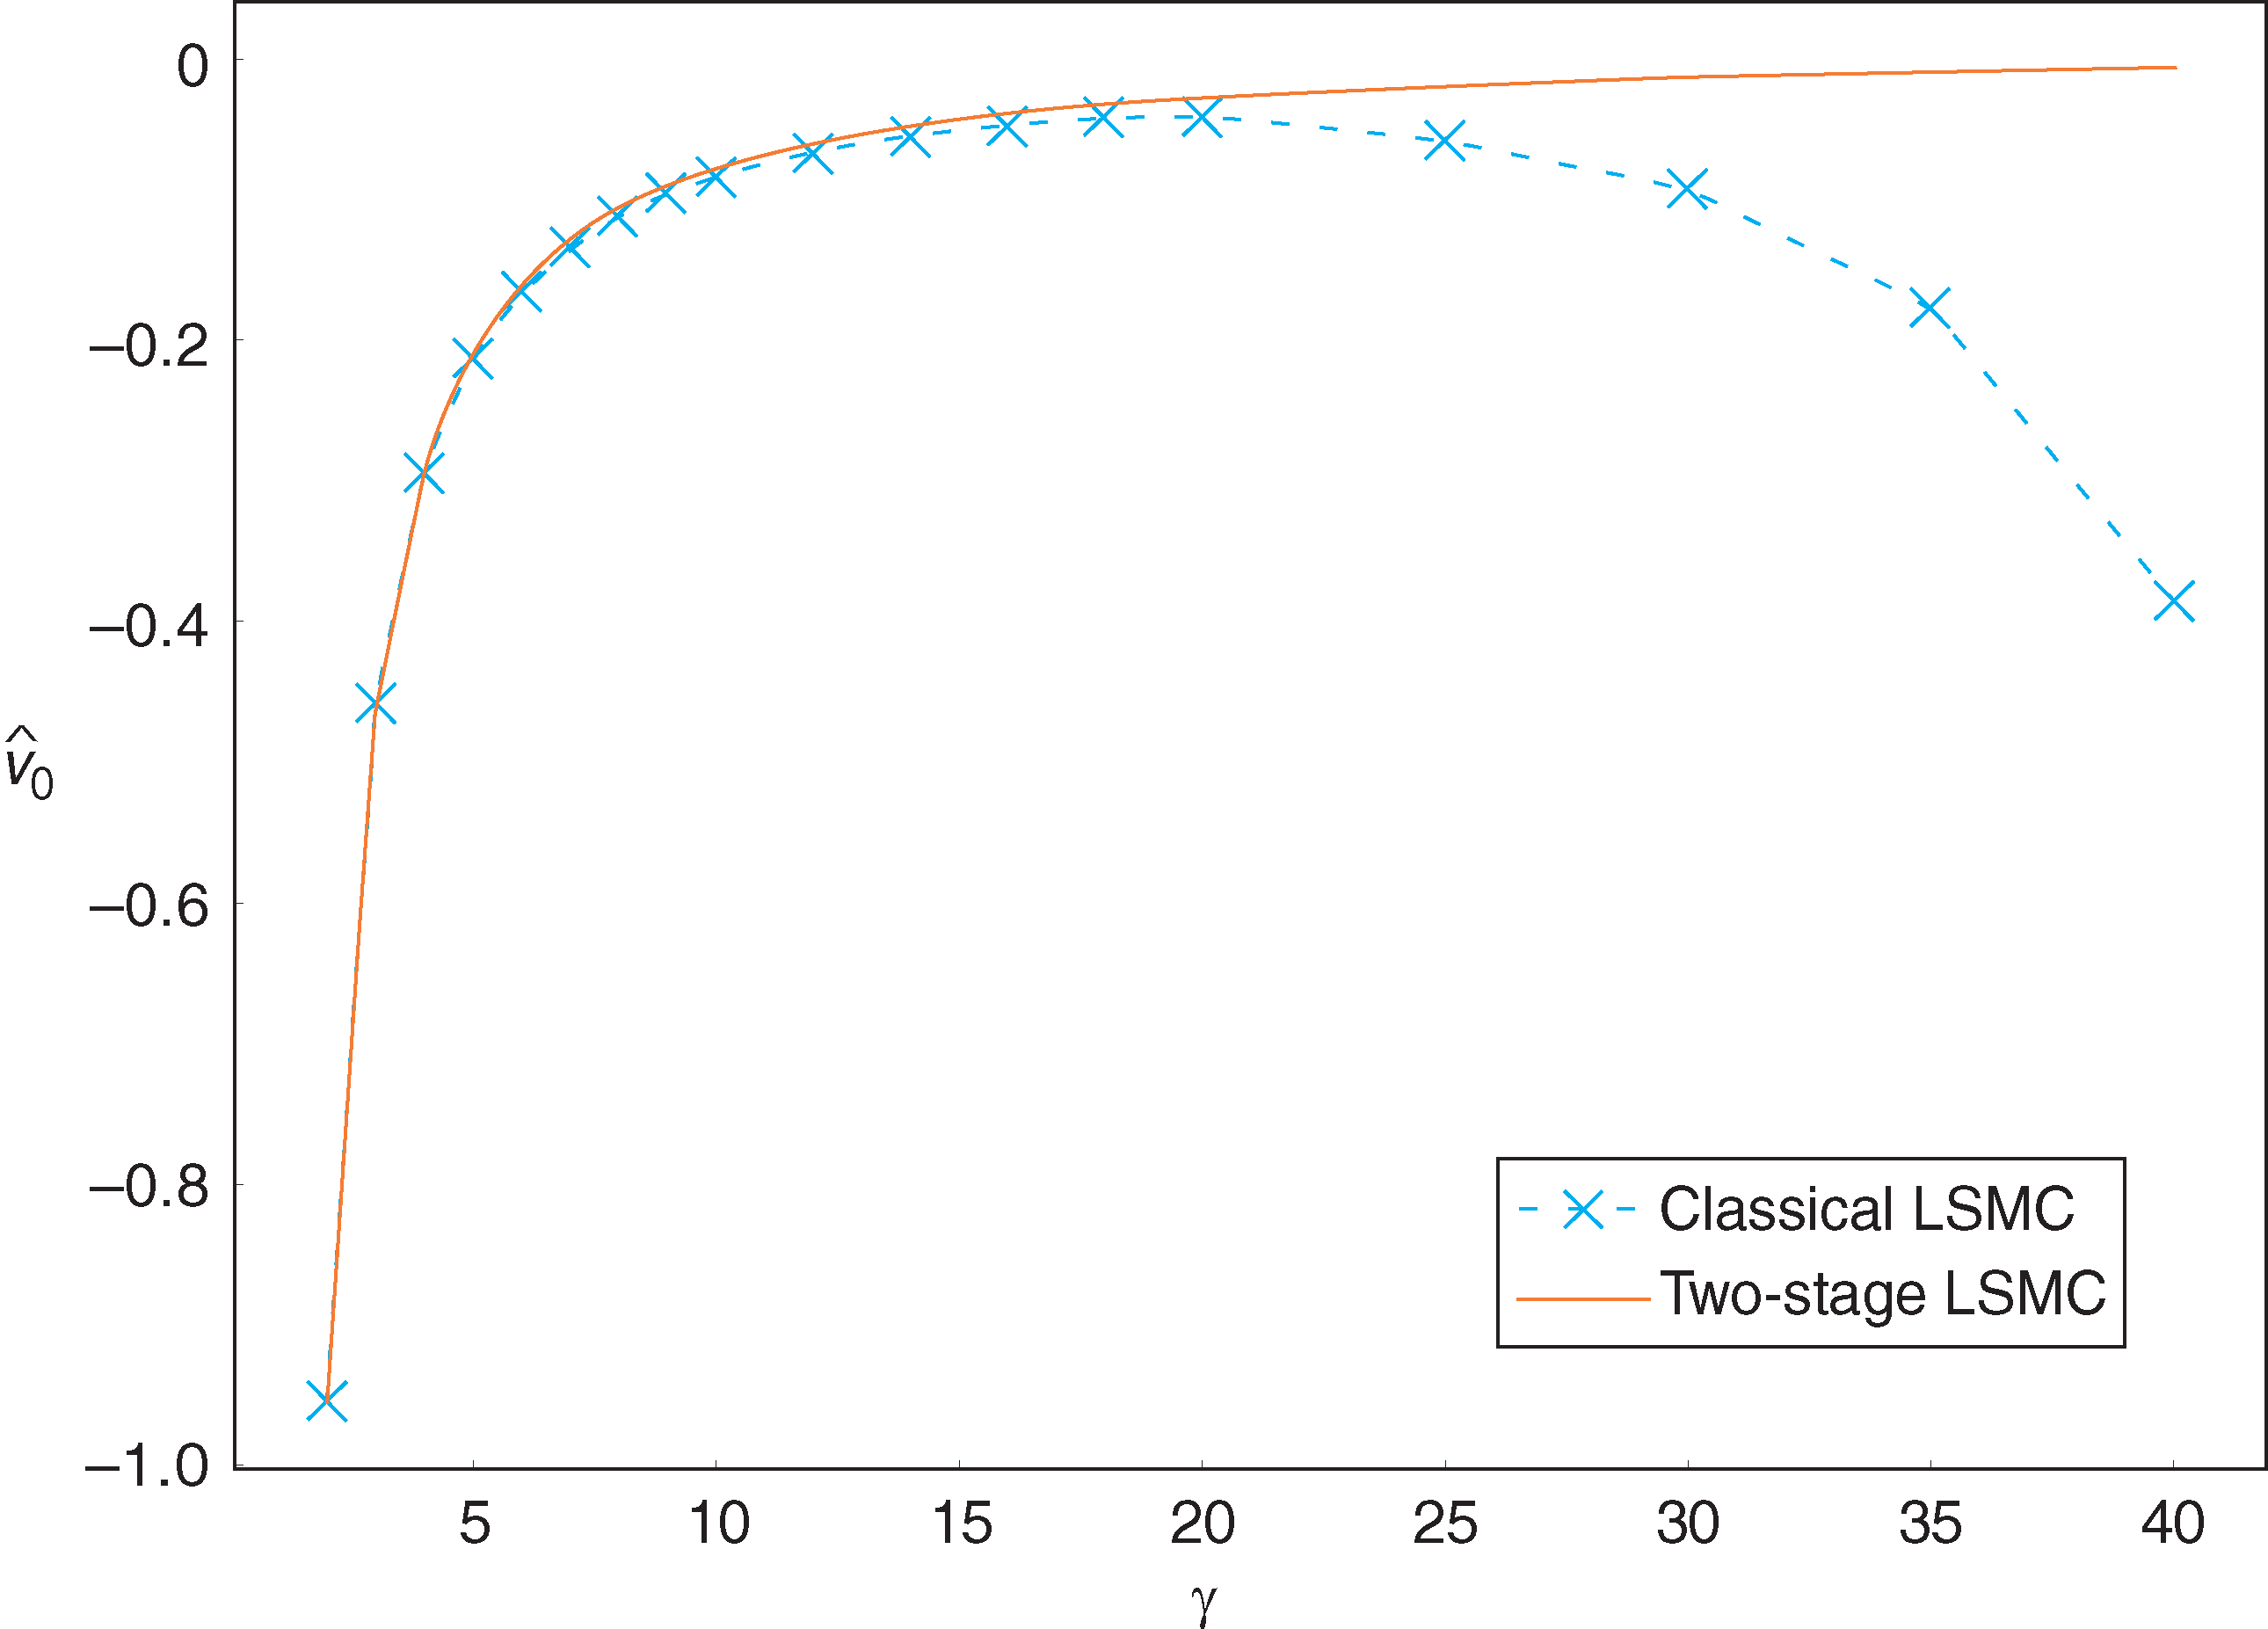 Two-stage LSMC versus classical LSMC for CRRA utility.